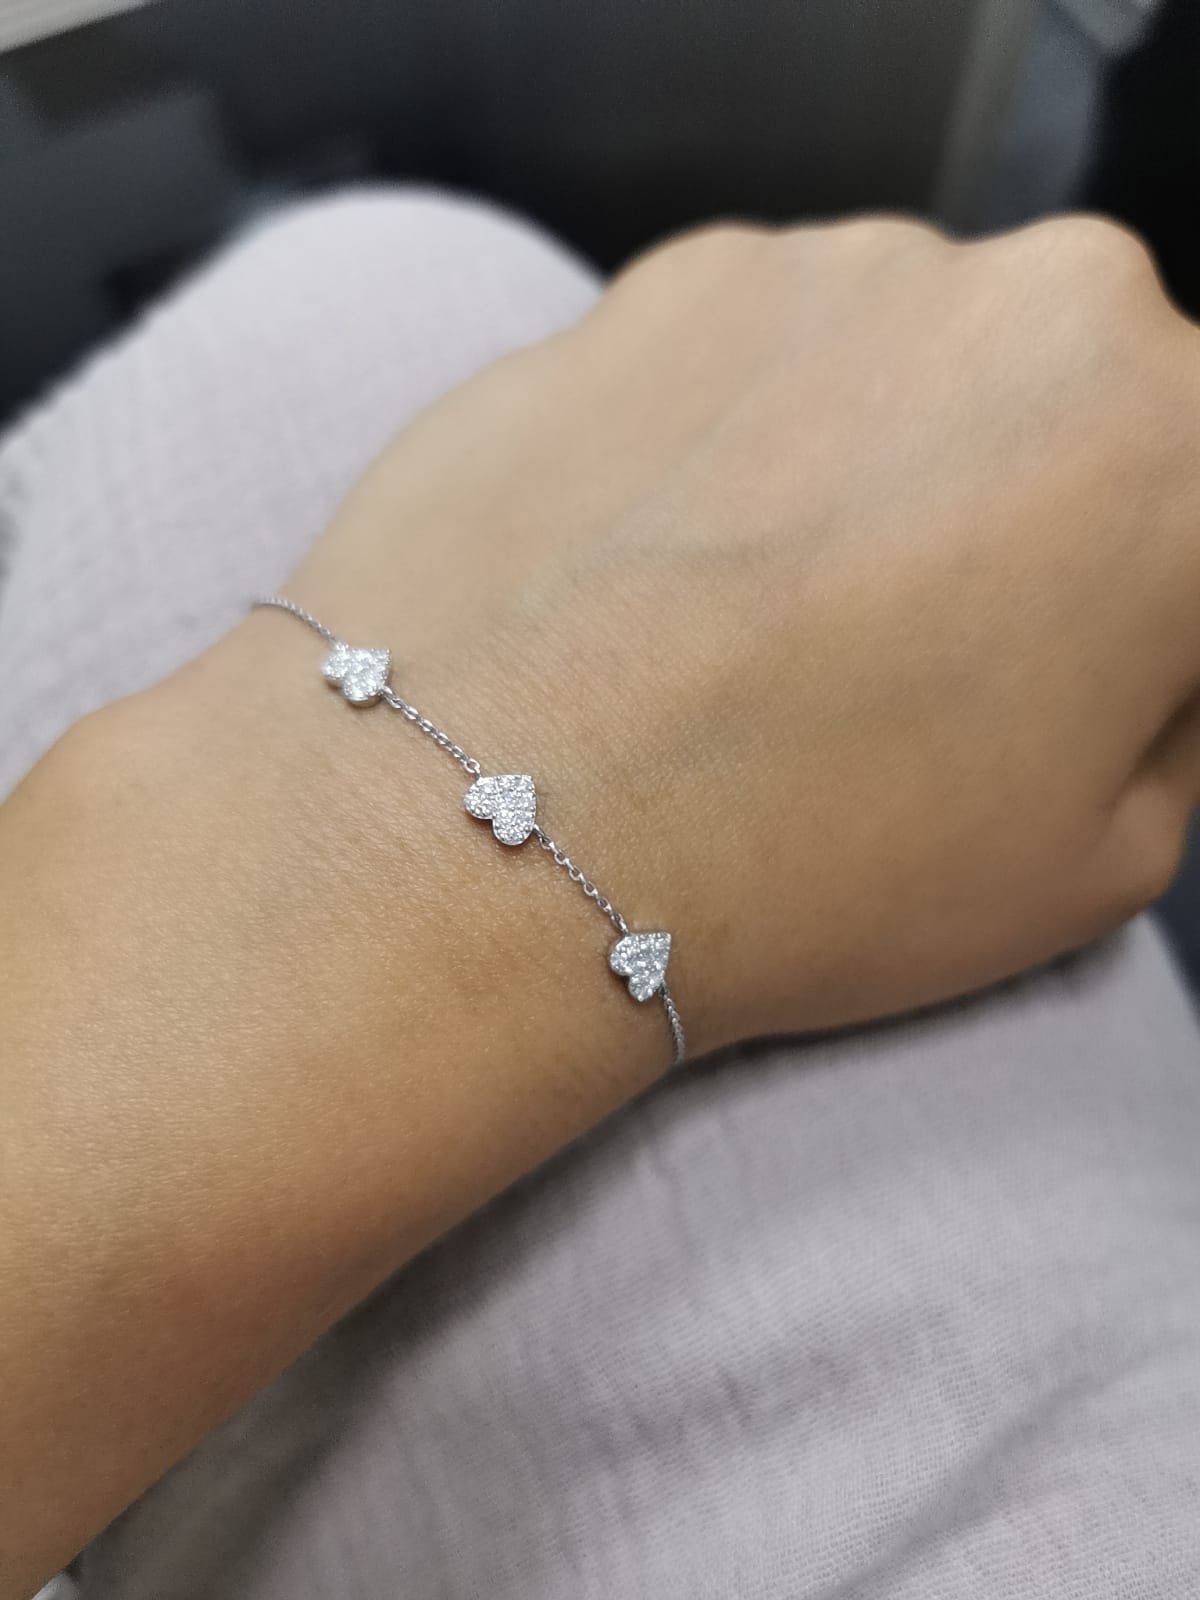 Make A Statement With This Elegant Triple Heart Chain Bracelet. Featuring Three Intricately Detailed Hearts And A Classic Chain, This Unique Piece Looks Brilliant Worn As-Is Or Layered With Other Jewelry. 